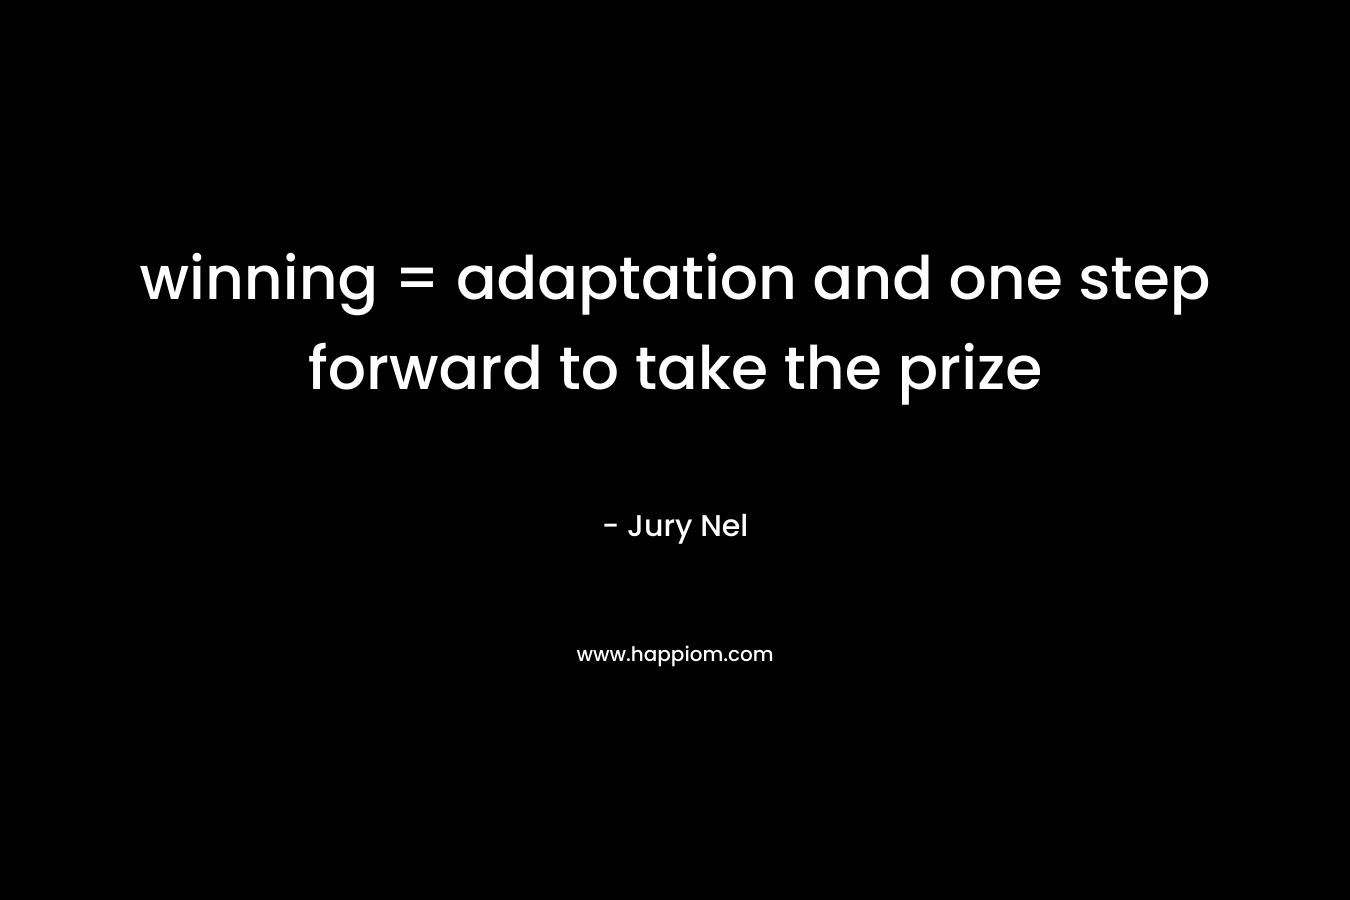 winning = adaptation and one step forward to take the prize